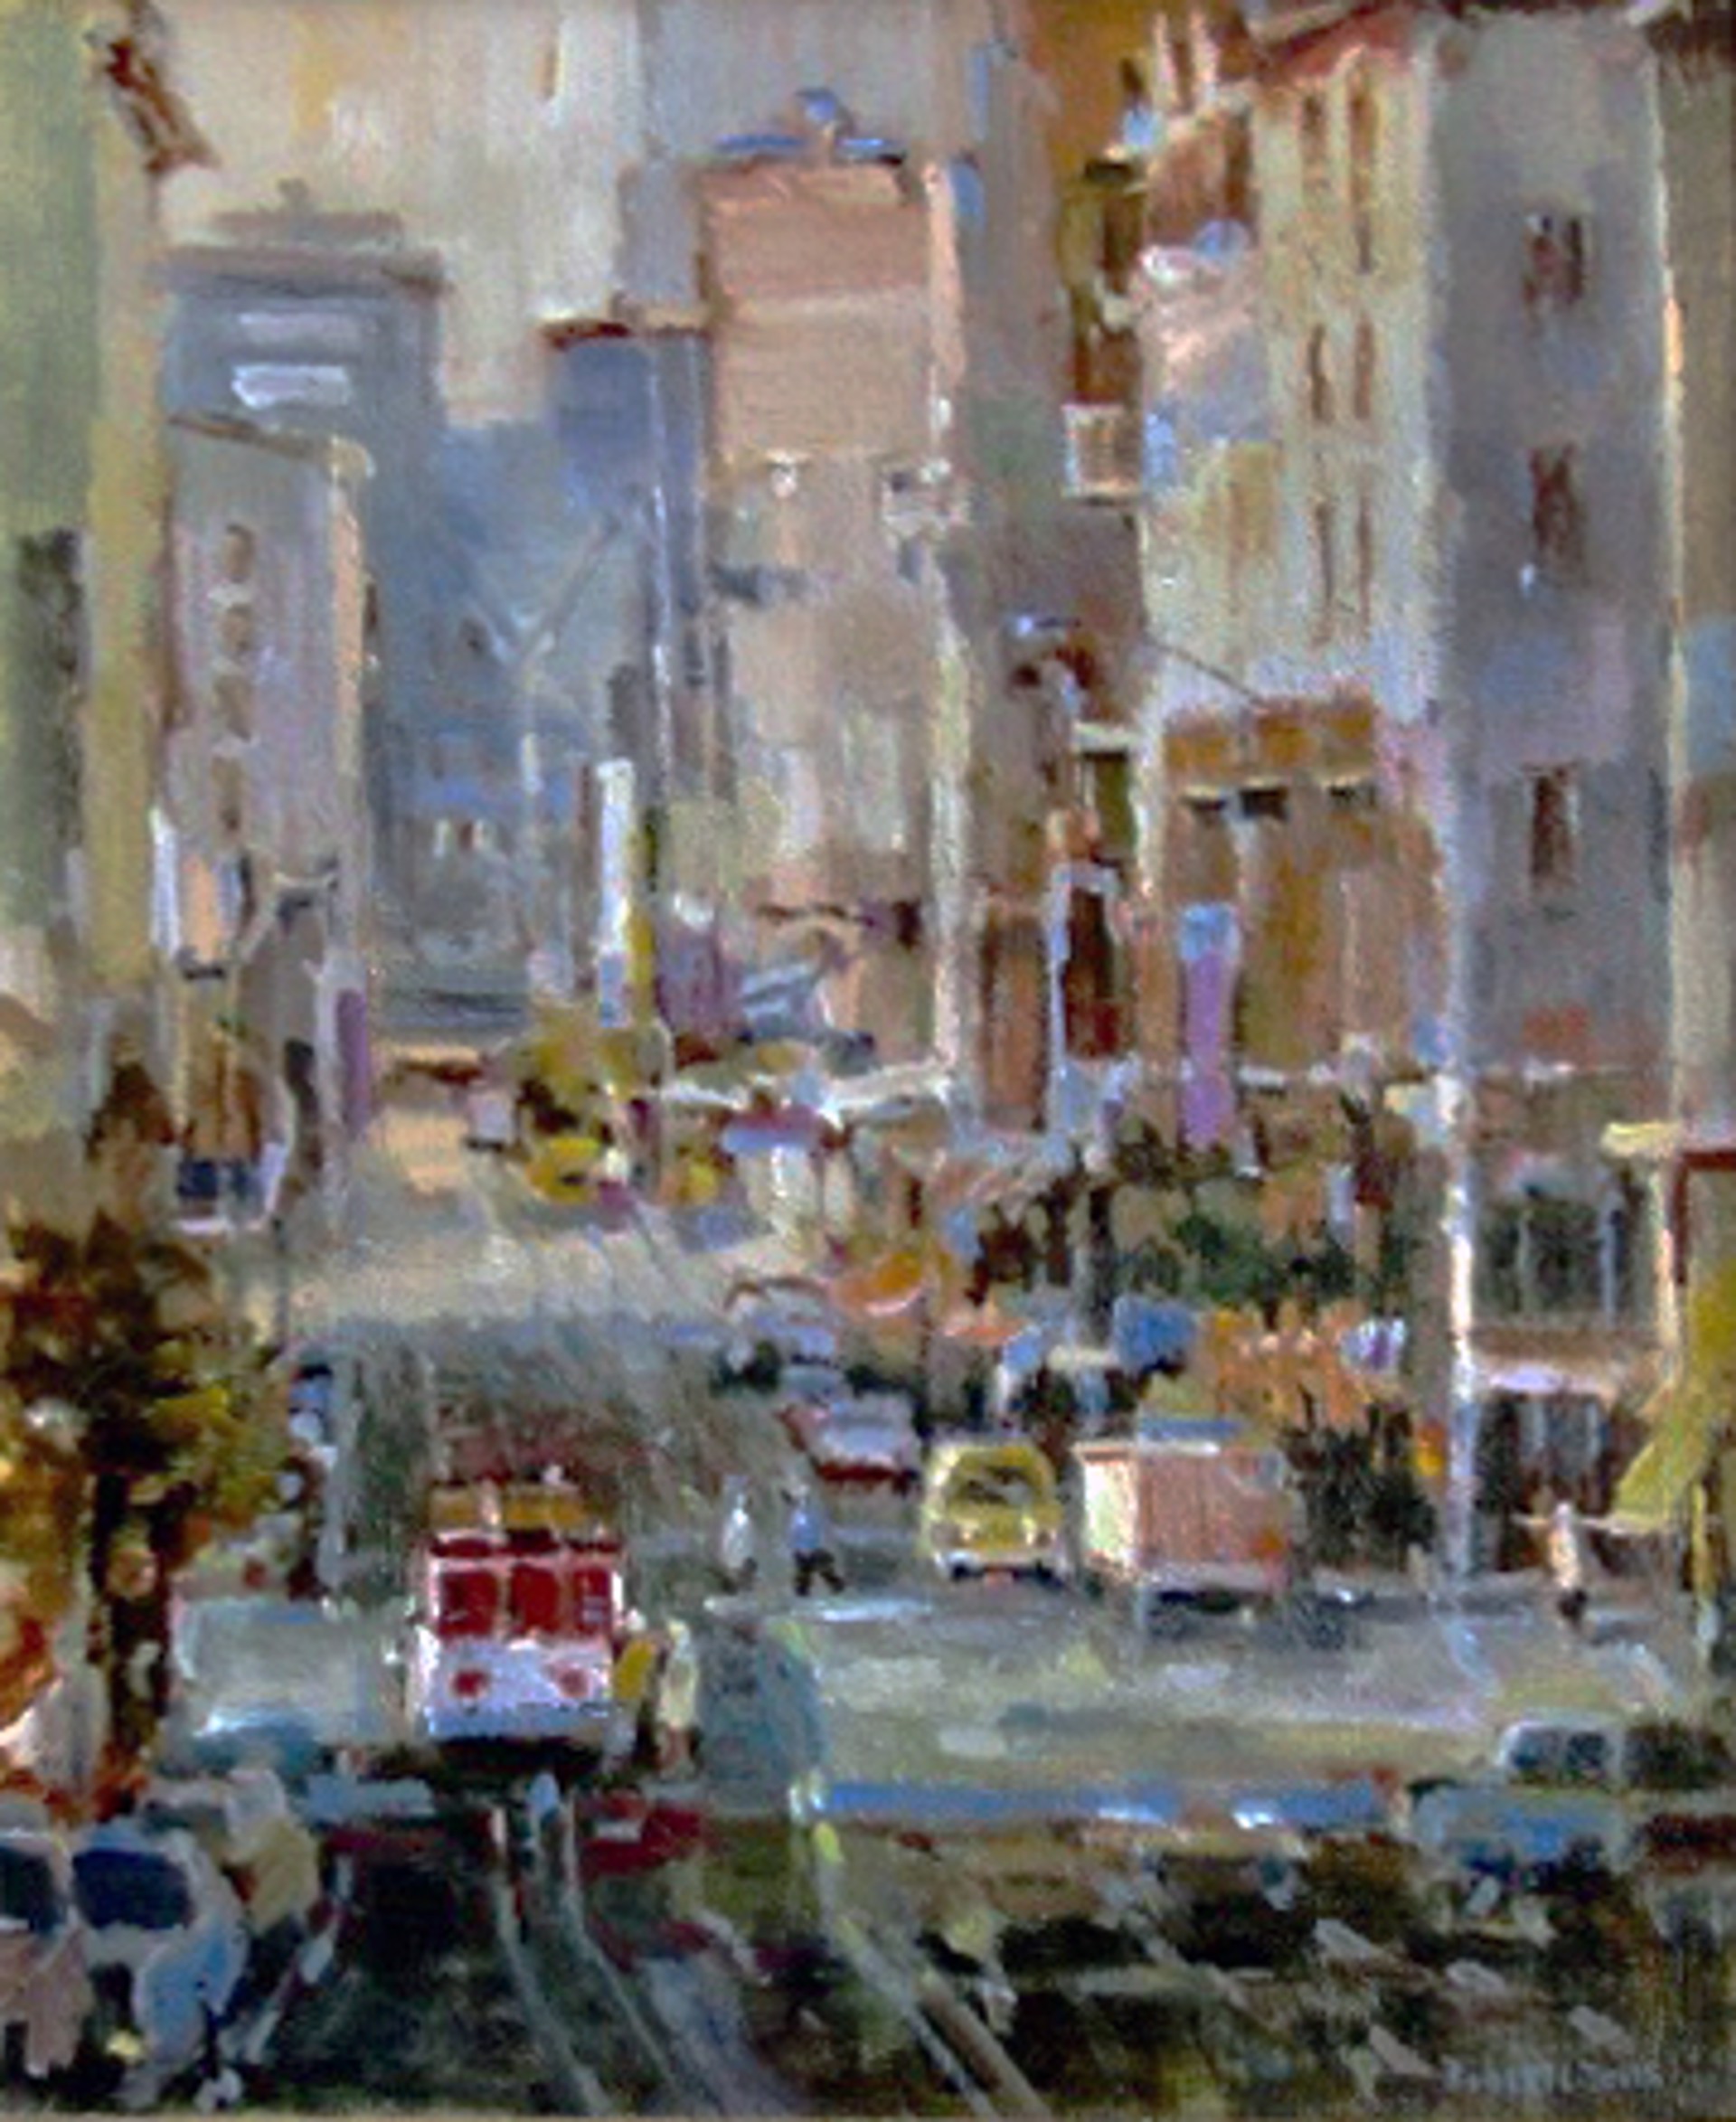 Early Morning in the City by Robert L. Davis (1930-2023)